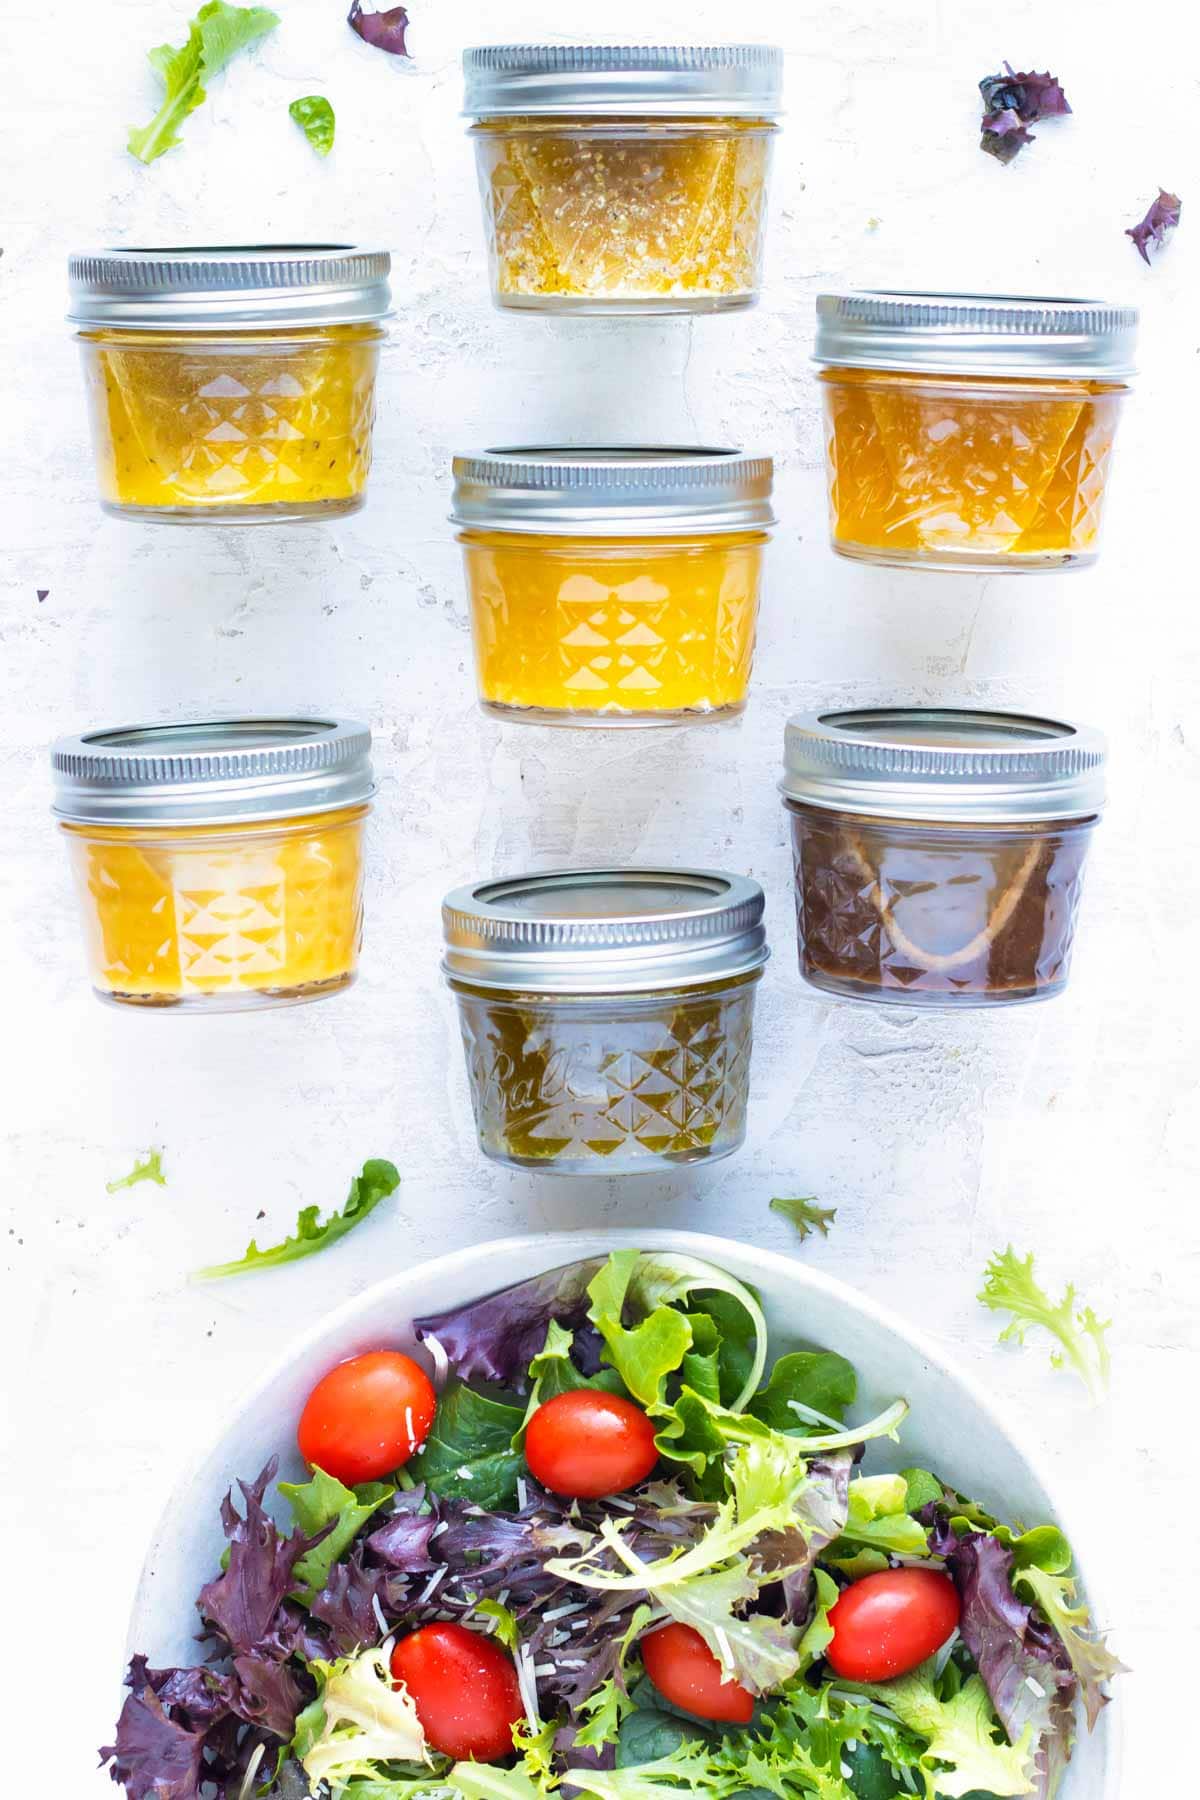 Seven healthy apple cider vinegar salad dressing recipes in mason jar containers next to a spinach and arugula salad.